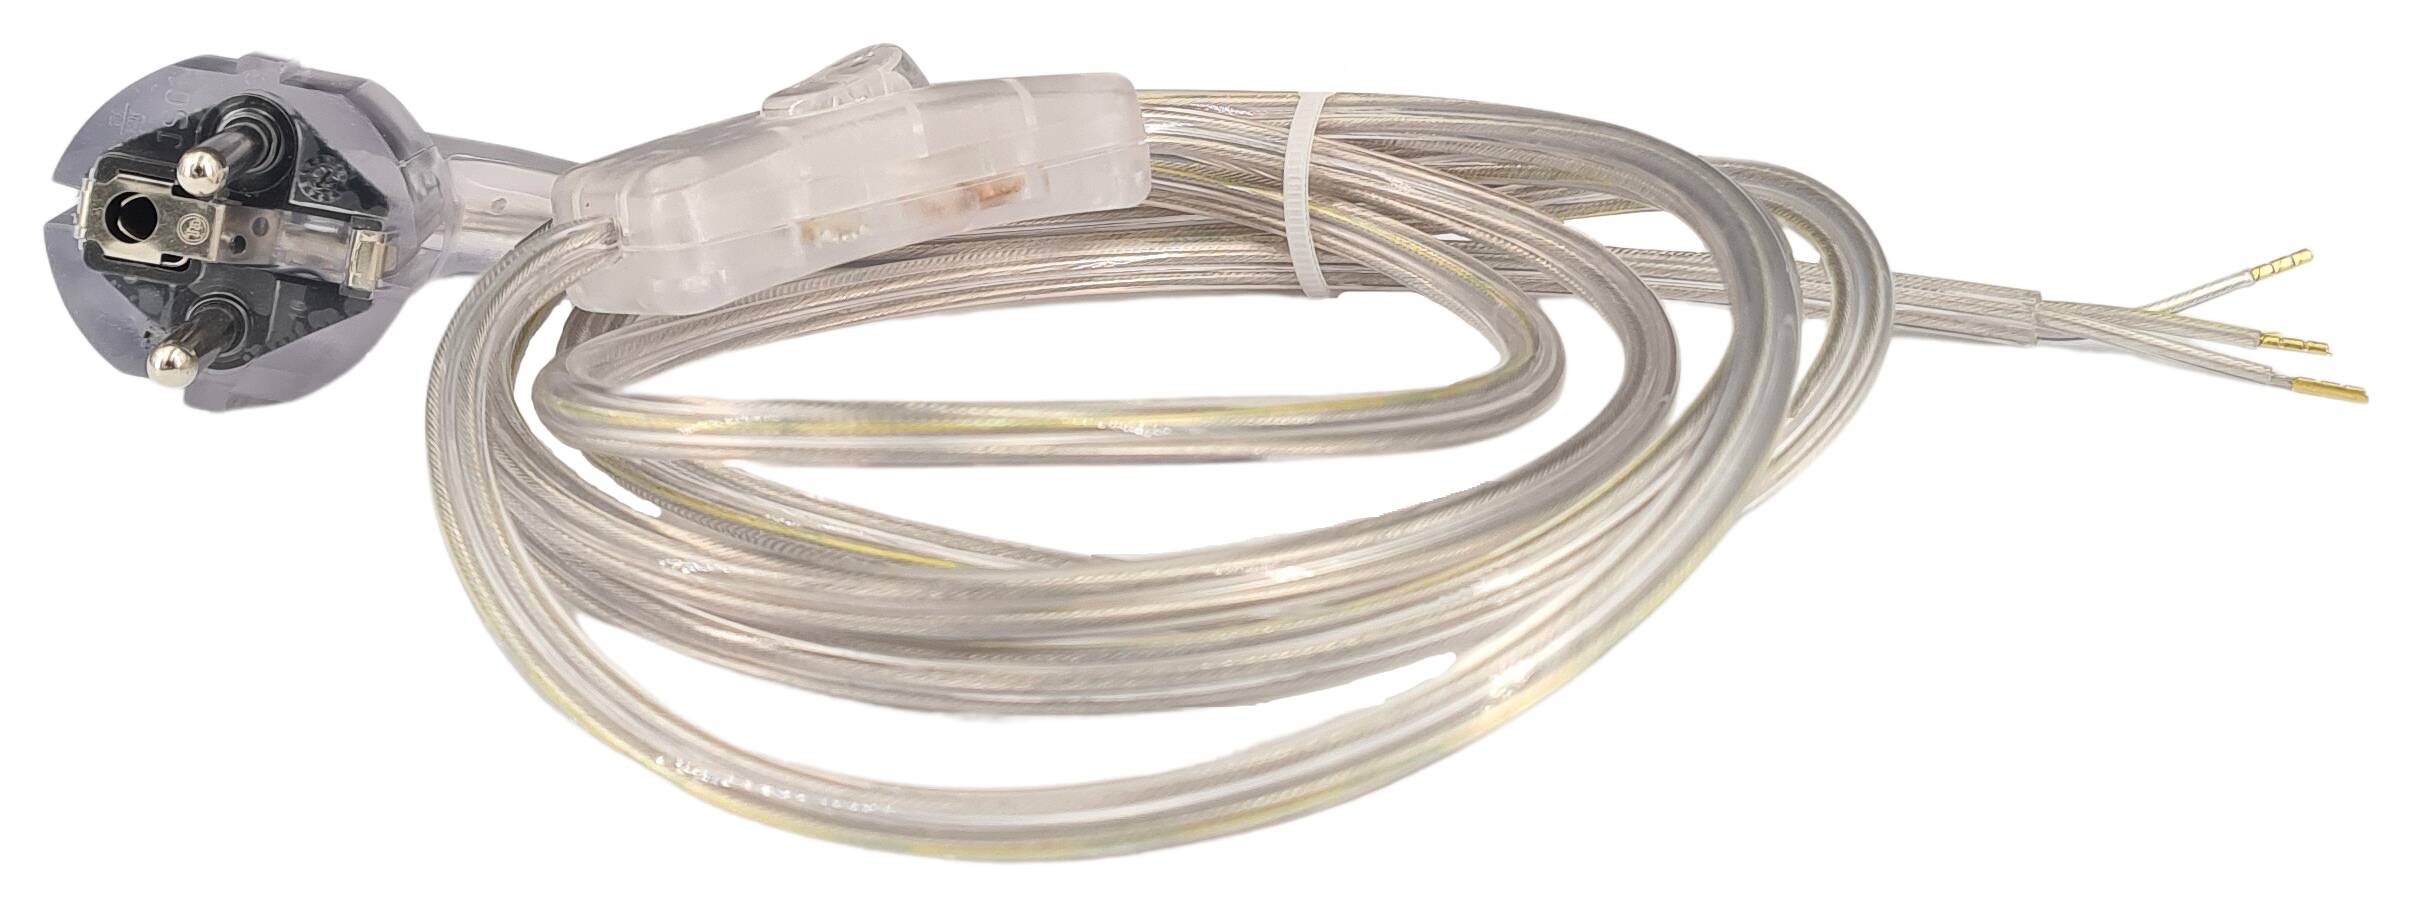 cord-set 3G 0,75/2000/800 with schuko angled plug and handswitch transparent